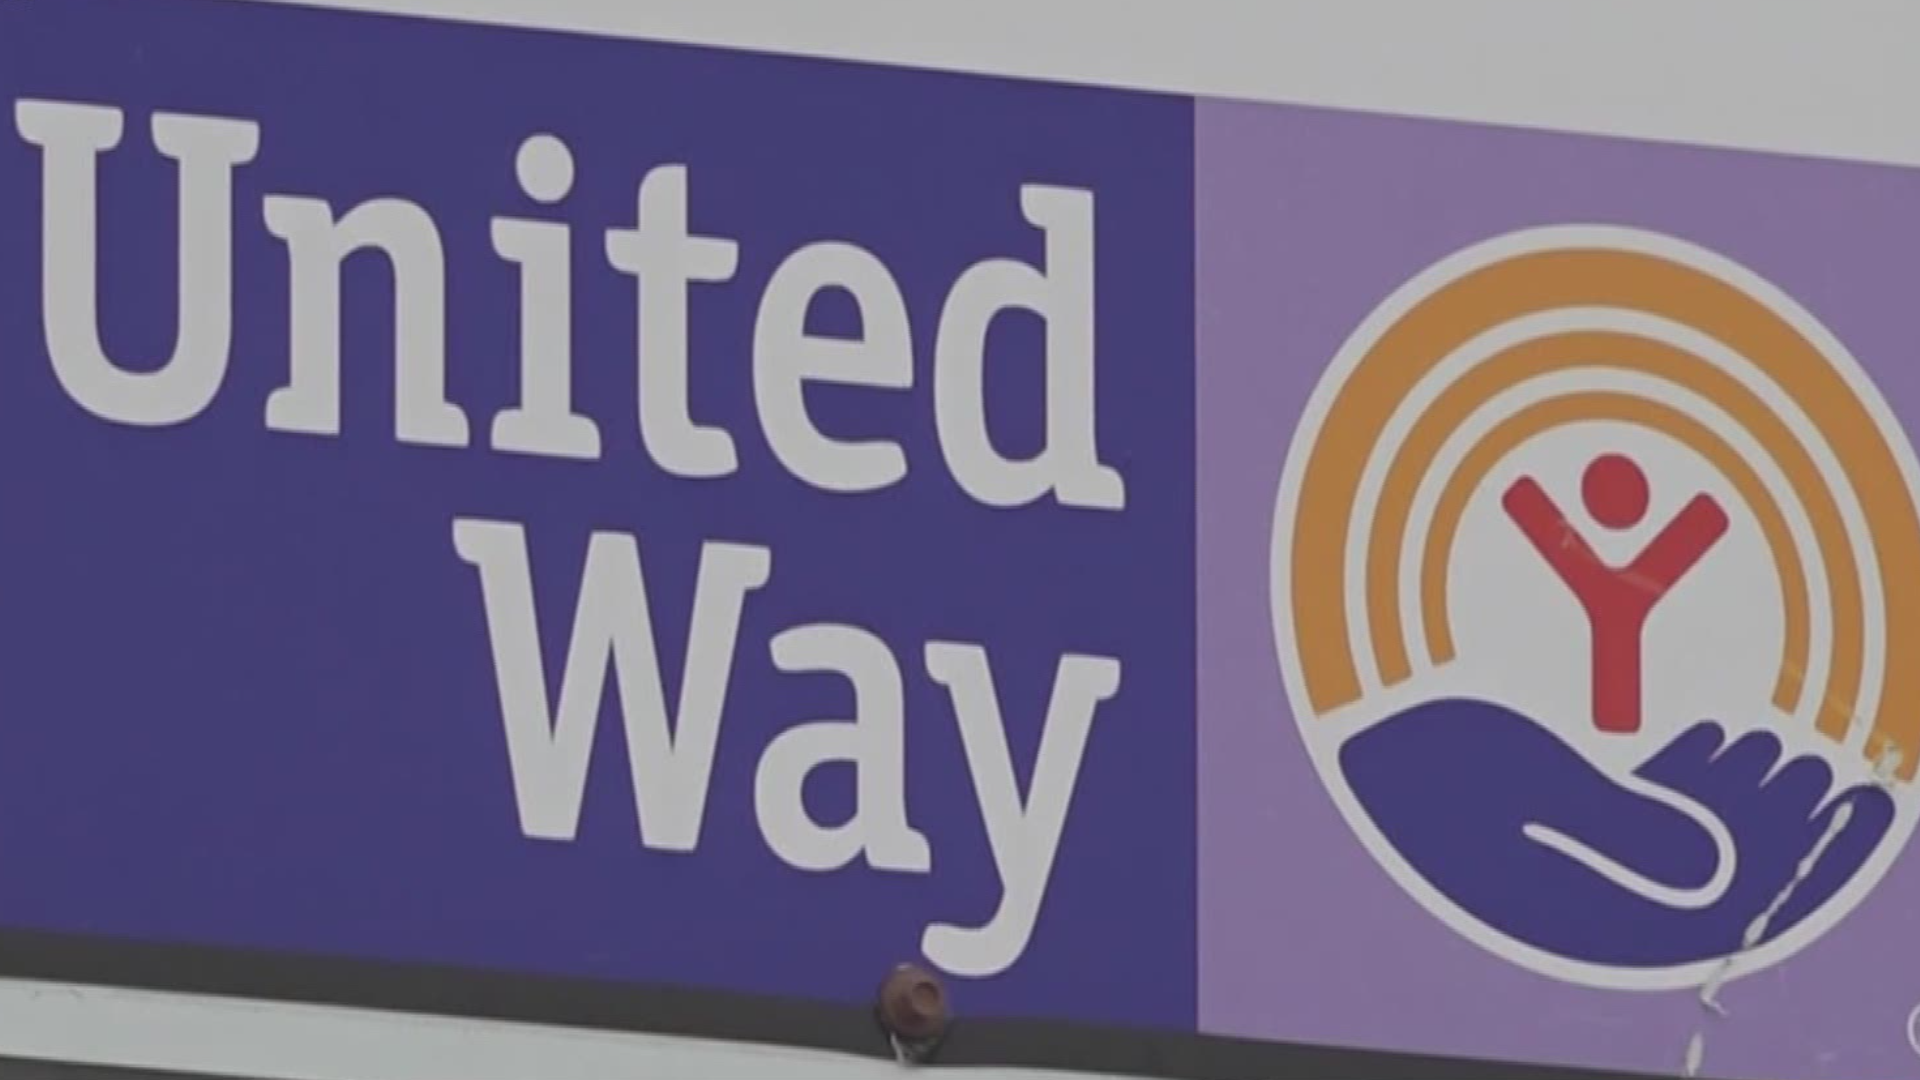 The United Way of Central Texas' Volunteer Tax Assistance Program is taking place in several locations in Bell County including Temple, Belton, Harker Heights, and Killeen.